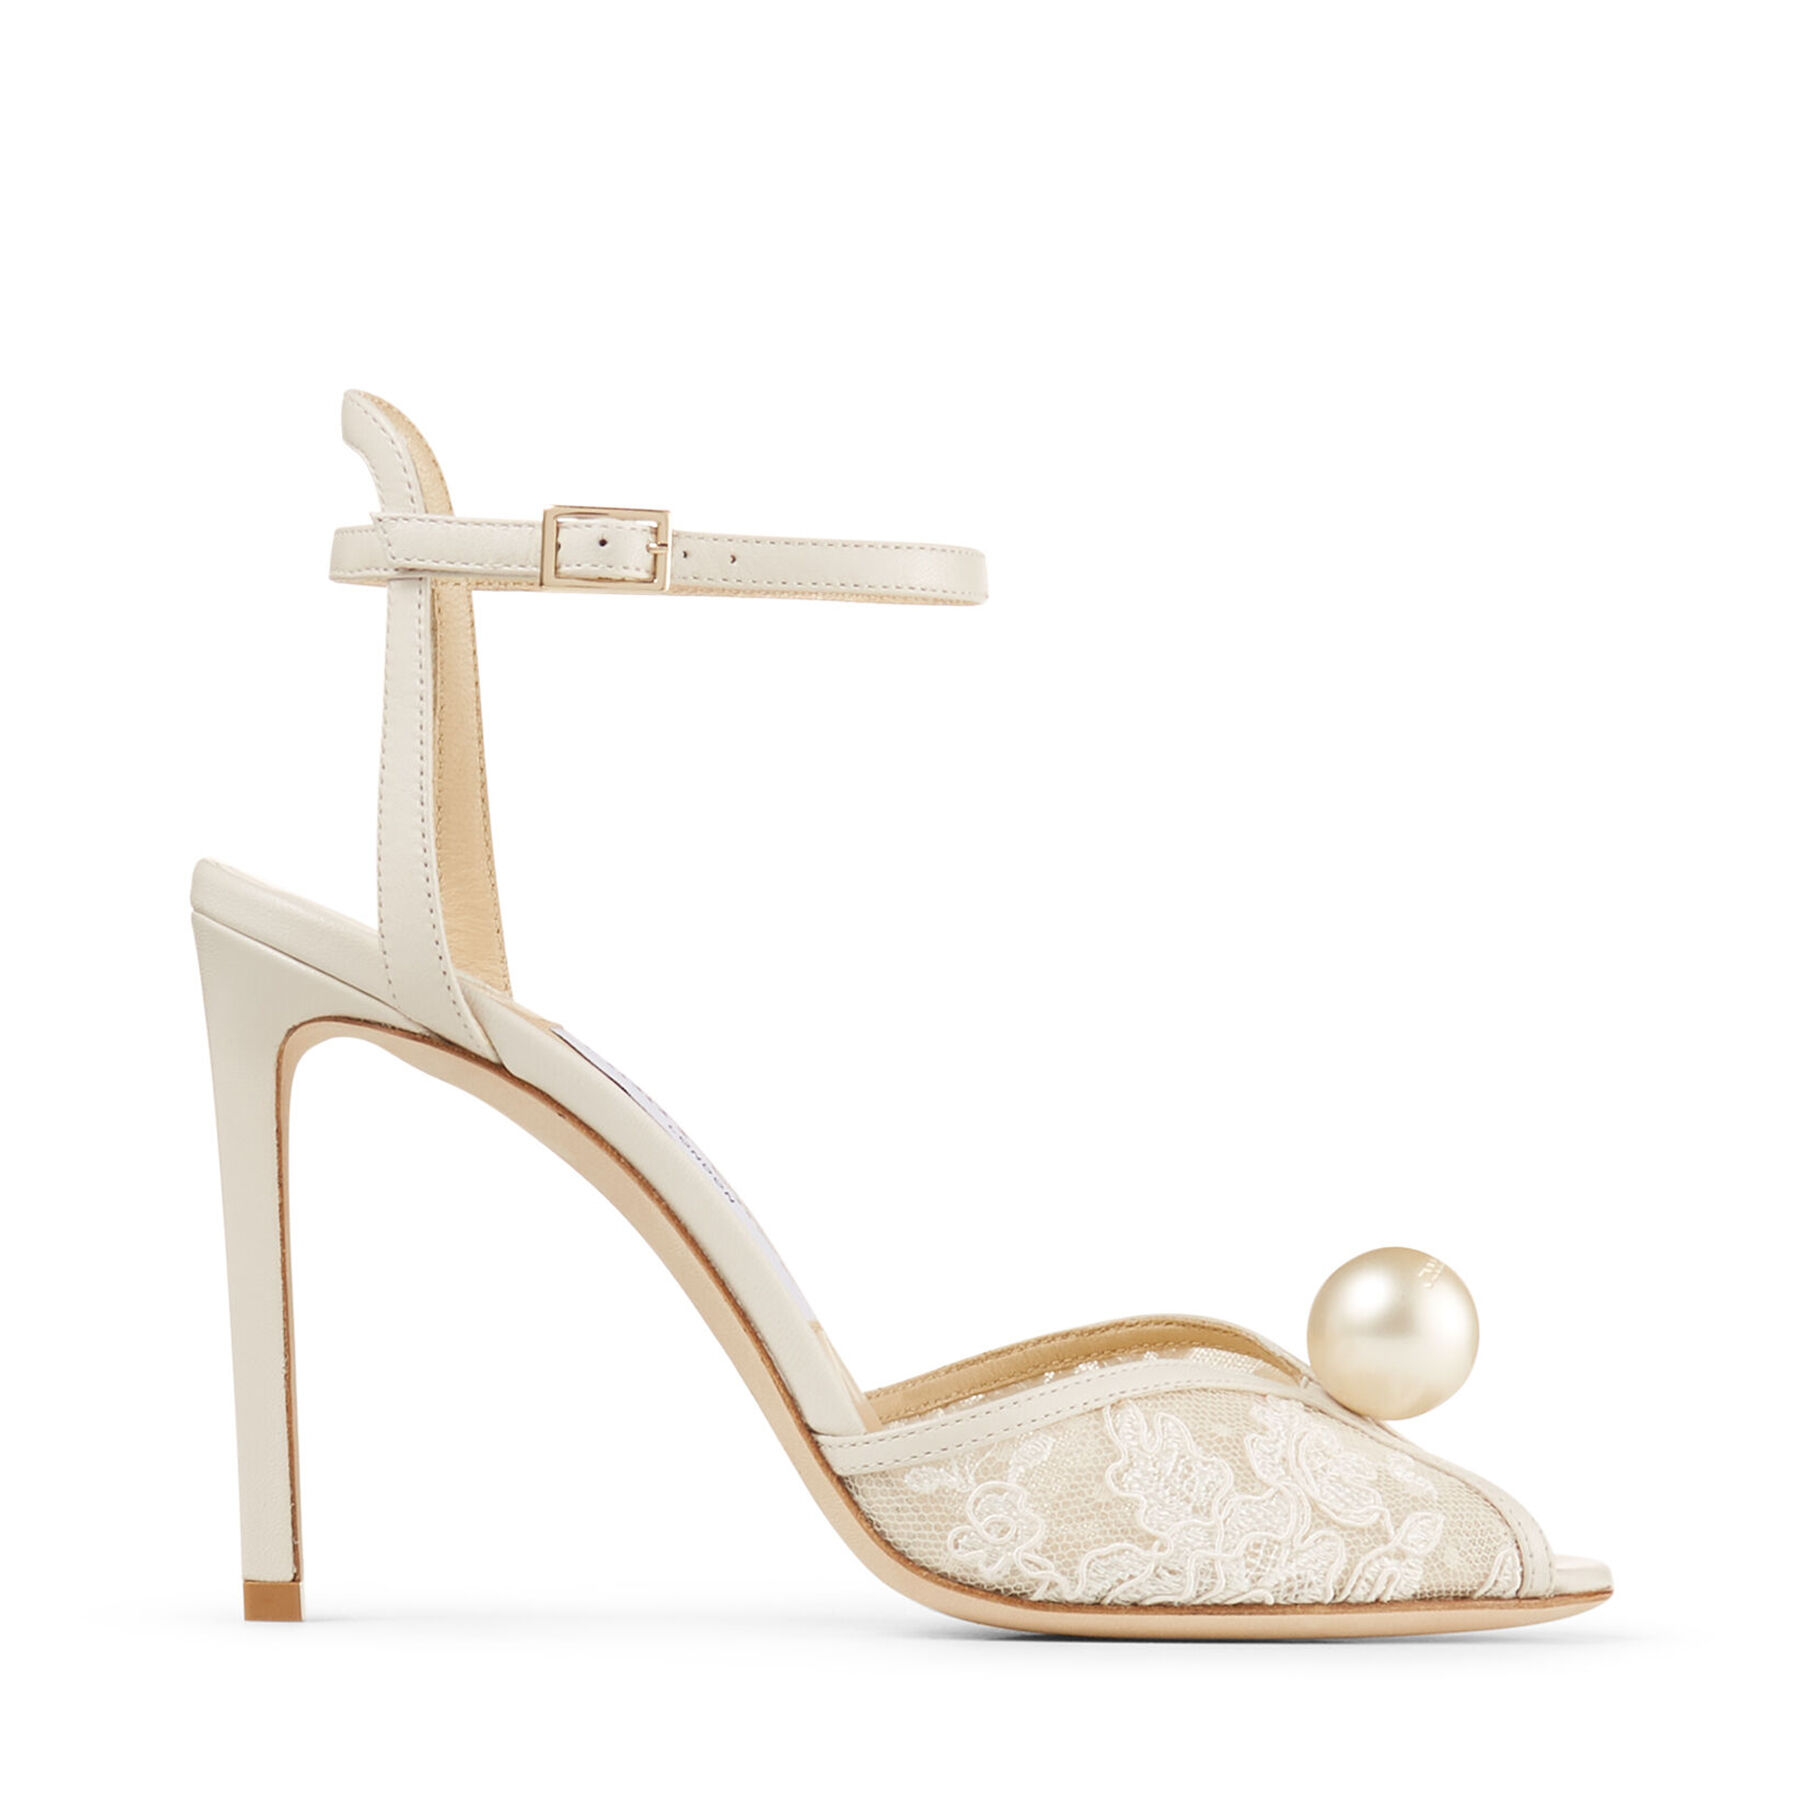 Lace Sandals with Pearl Detail|SACORA 100 '20 |JIMMY CHOO